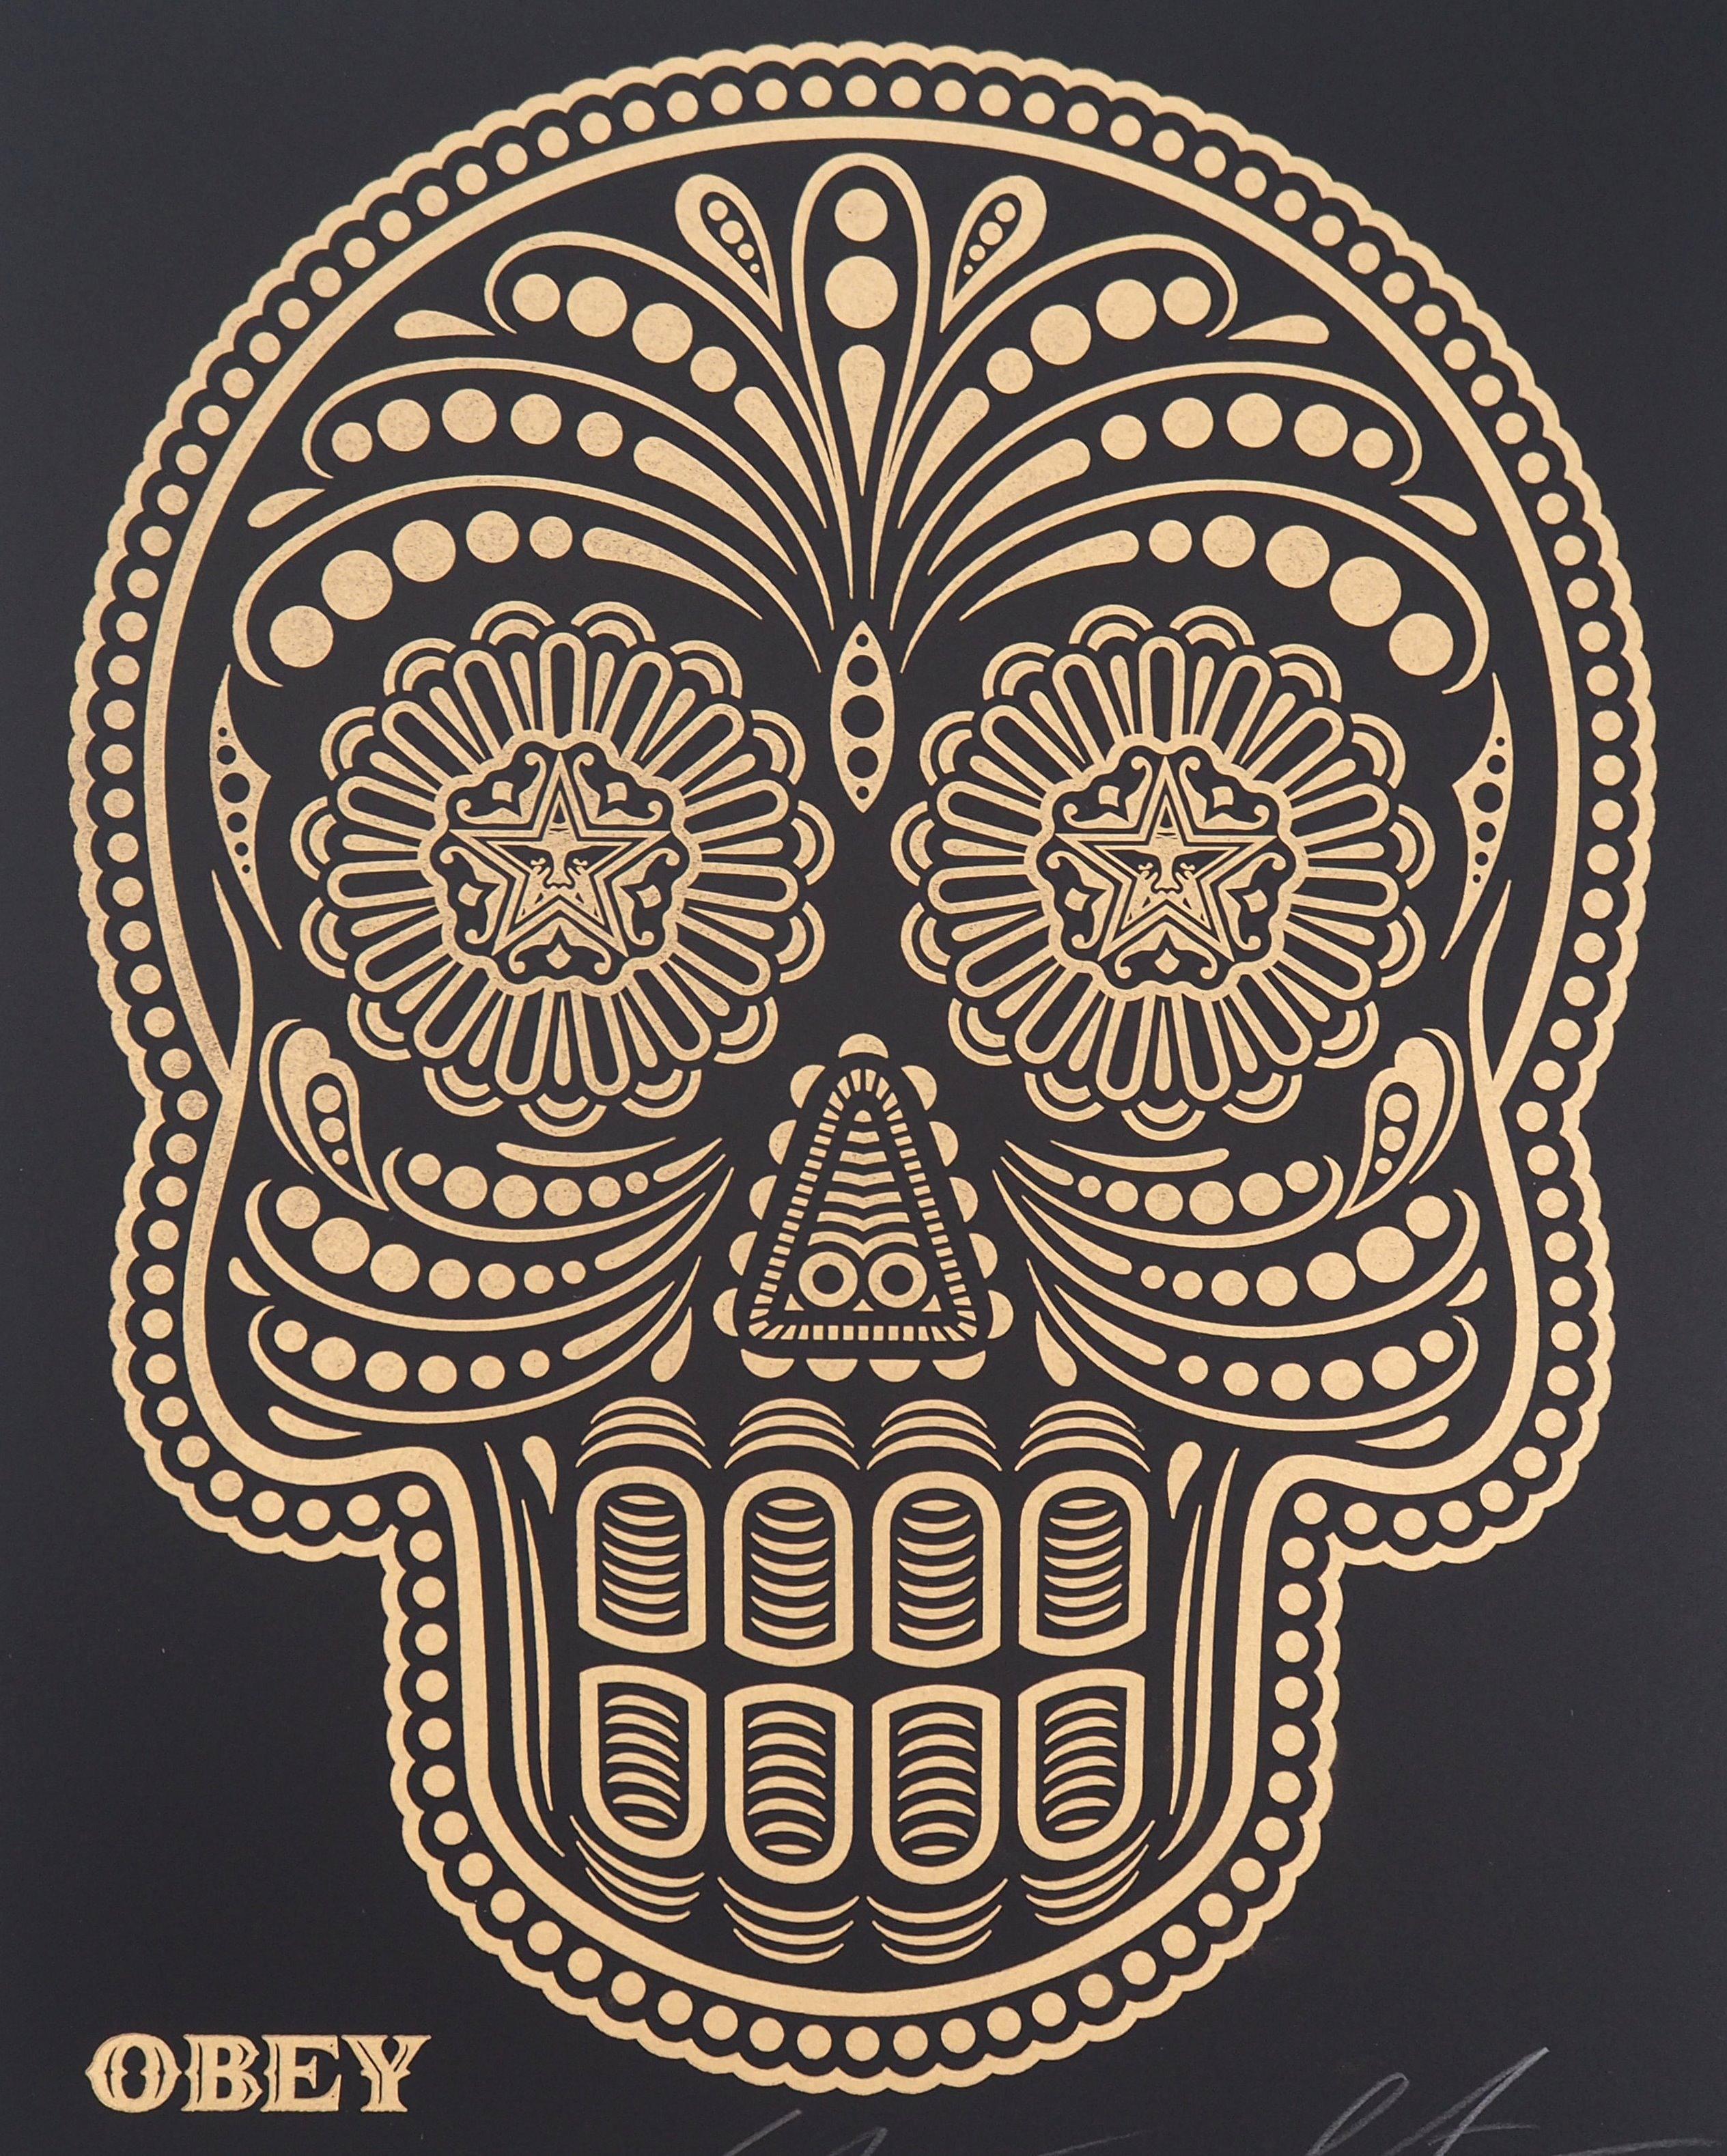 Shepard FAIREY (OBEY) and Ernesto YERENA (Ganas)
Dia de los Muertos / Day of the Dead

Two Original letterpress set (serigraphy)
Handsigned in pencil
Numbered /250 copies
On black vellum 35 x 28 cm (c. 18 x 11 inch)

Excellent condition